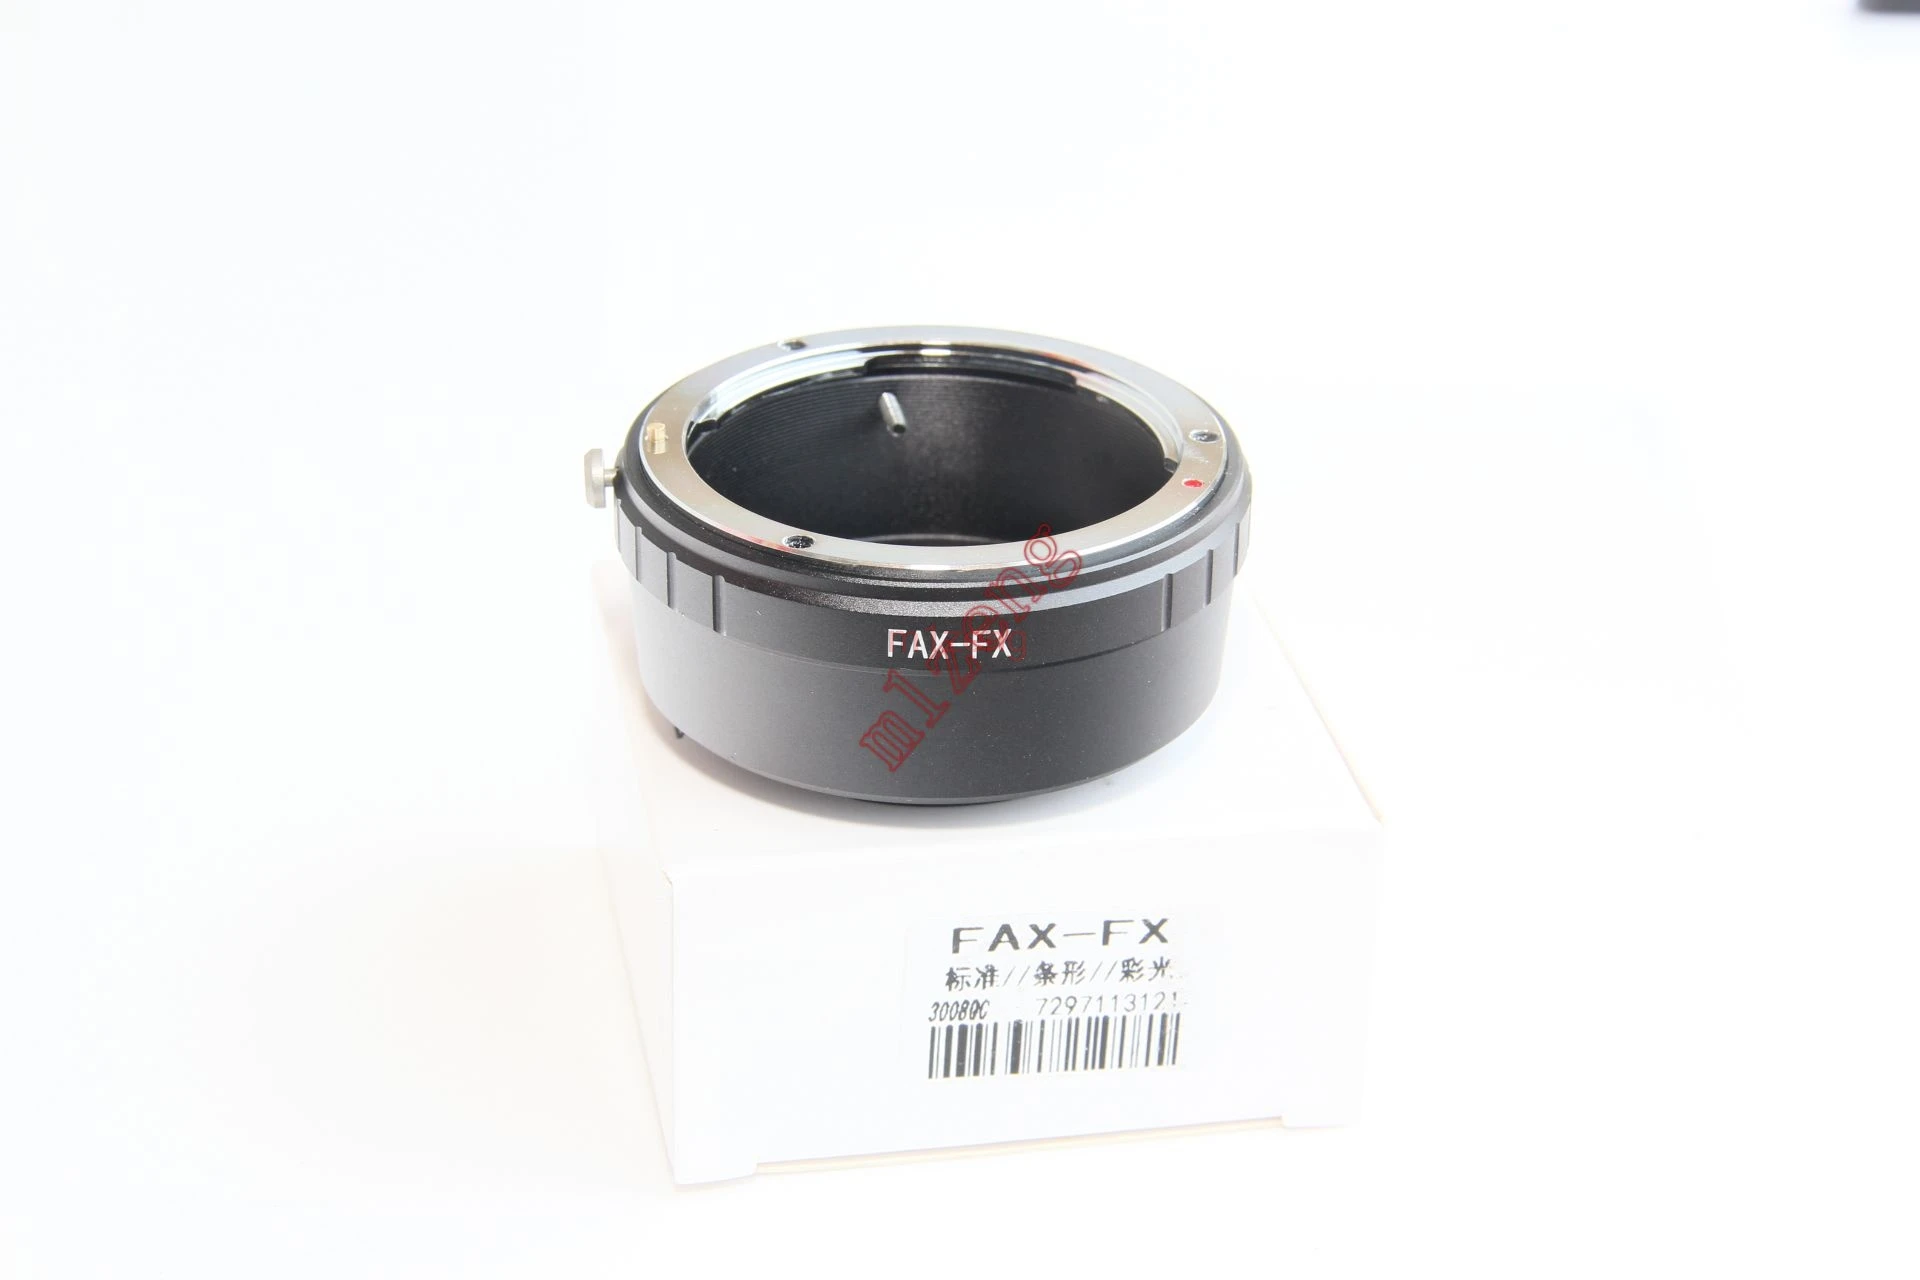 

FAX fujica to fx lens adapter ring for Fujifilm fuji X X-E2/X-E1/X-Pro1/X-M1/X-A3/X-A5/X-T1 xt2 xt10 xt20 x100f xpro2 camera